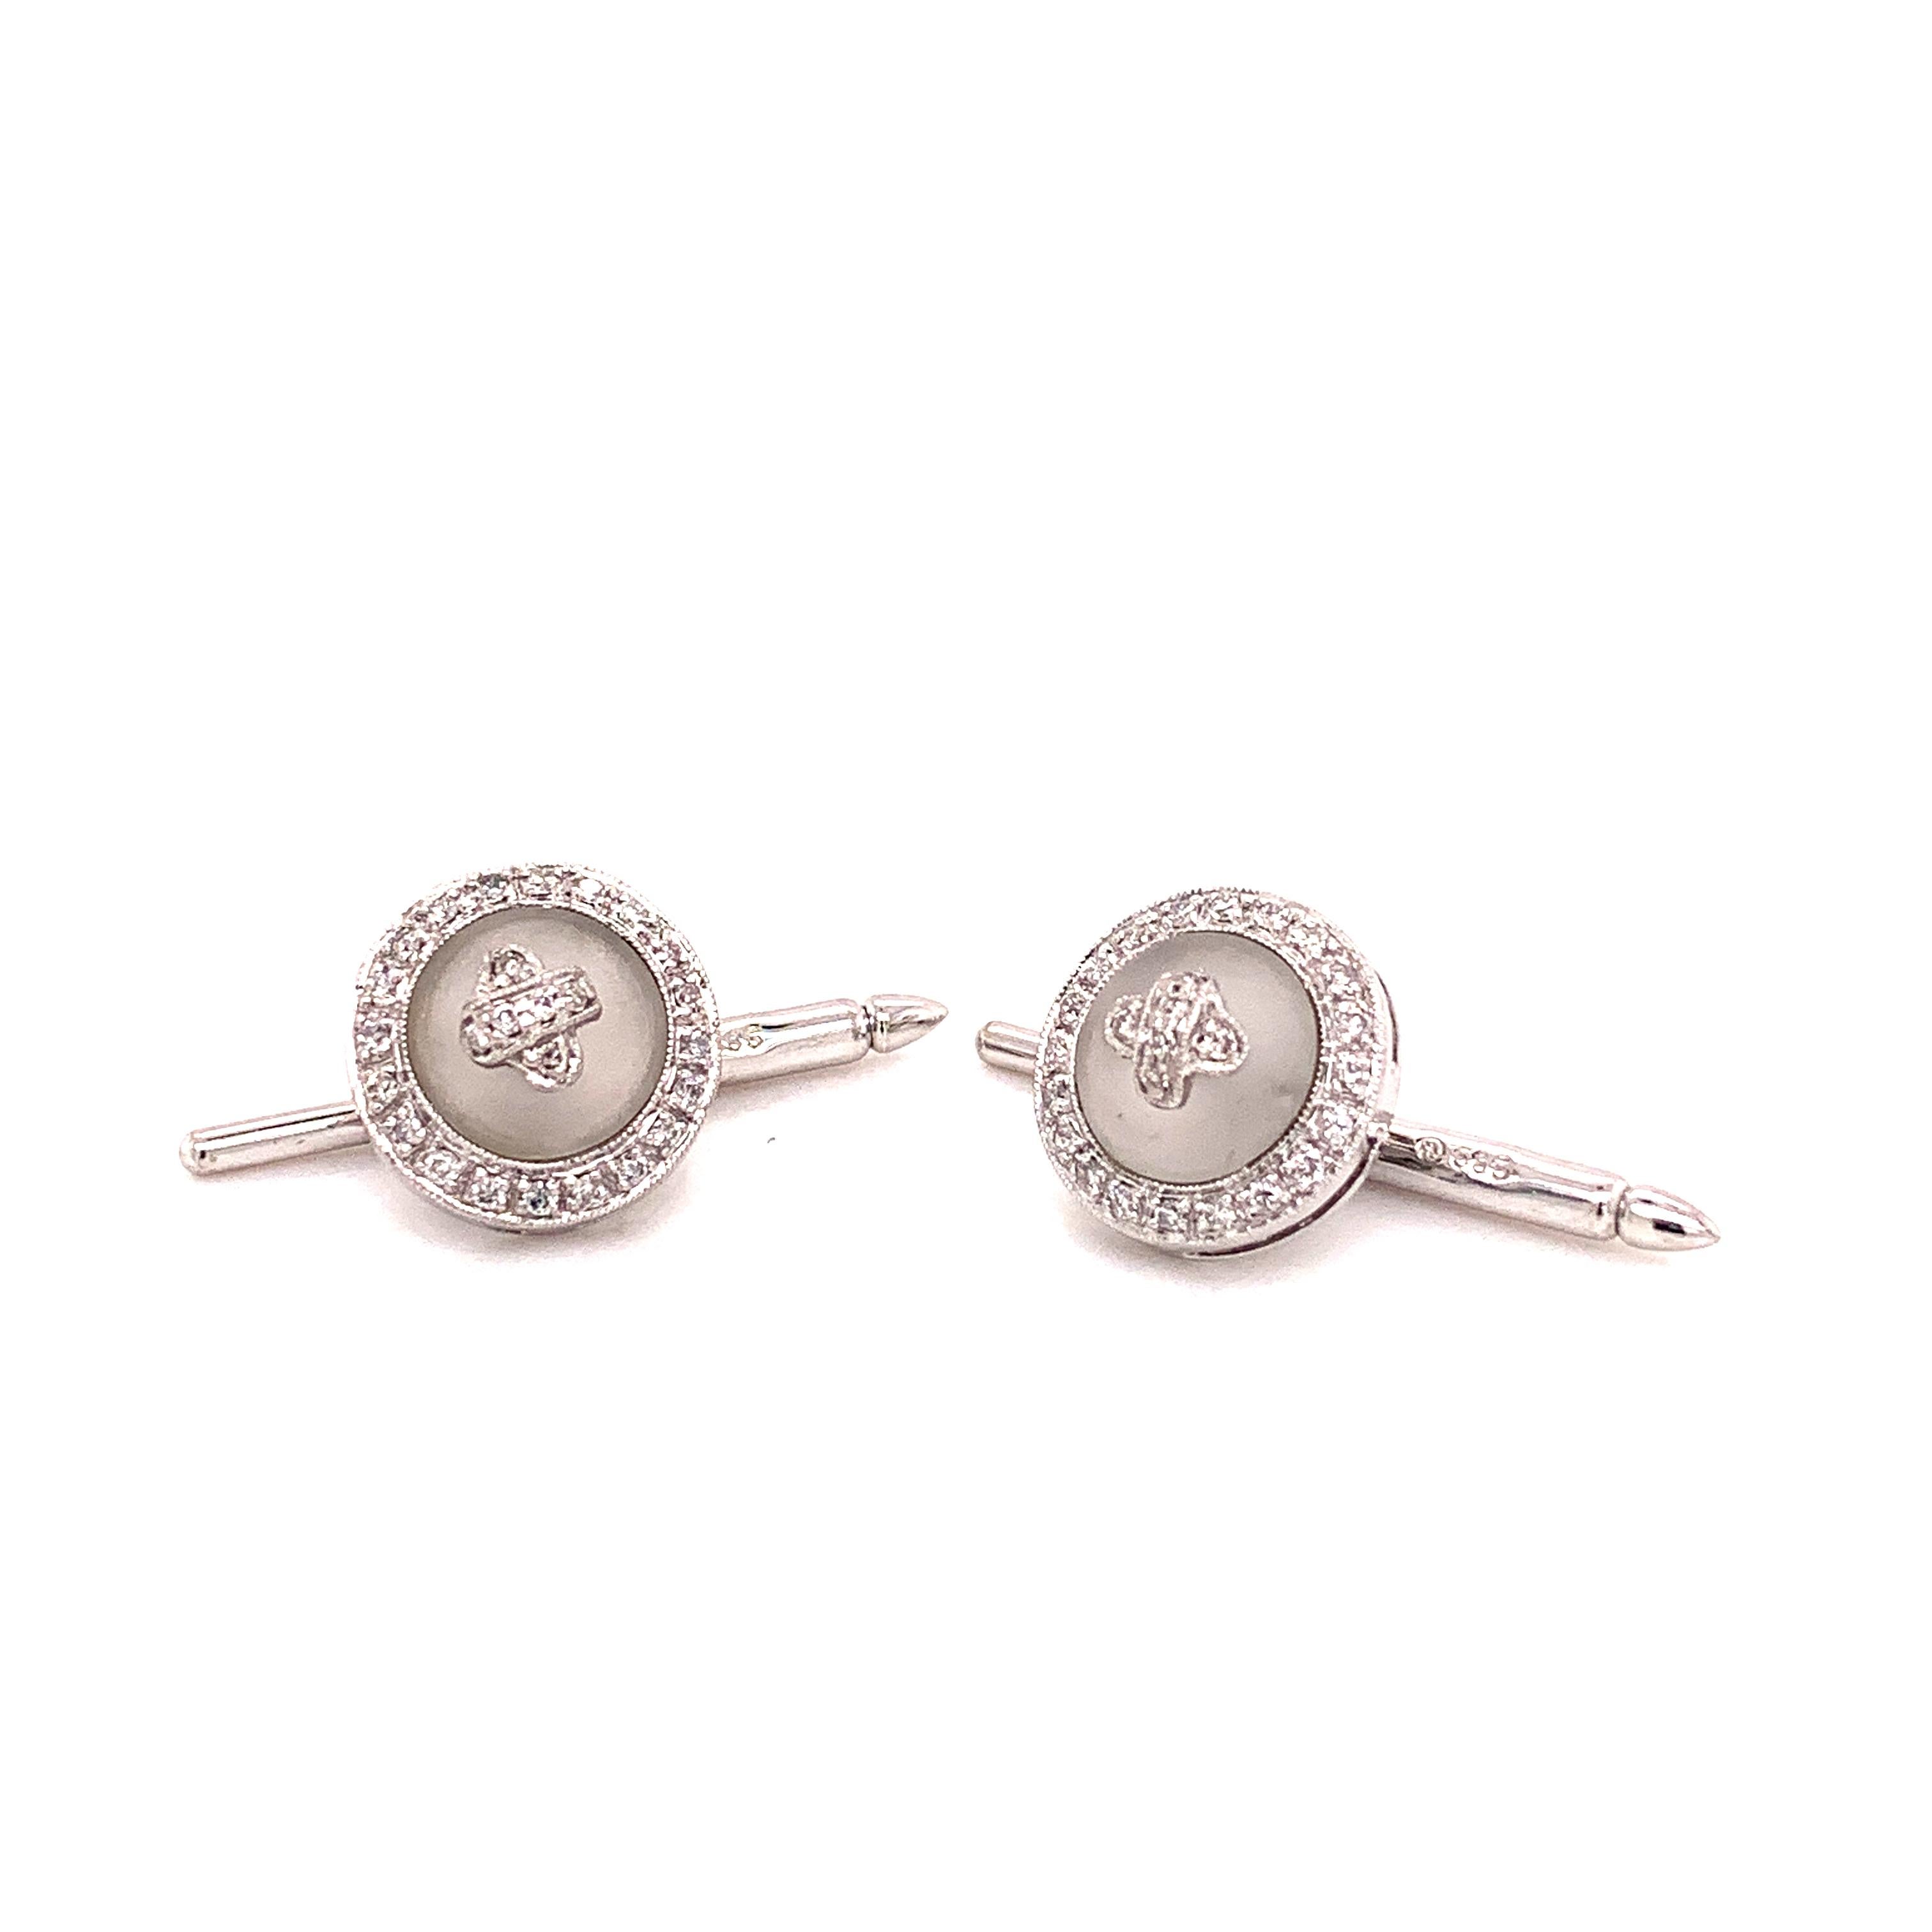 Sophia D. 0.63 Carat Diamond with Frosted Crystal Cufflinks For Sale 1